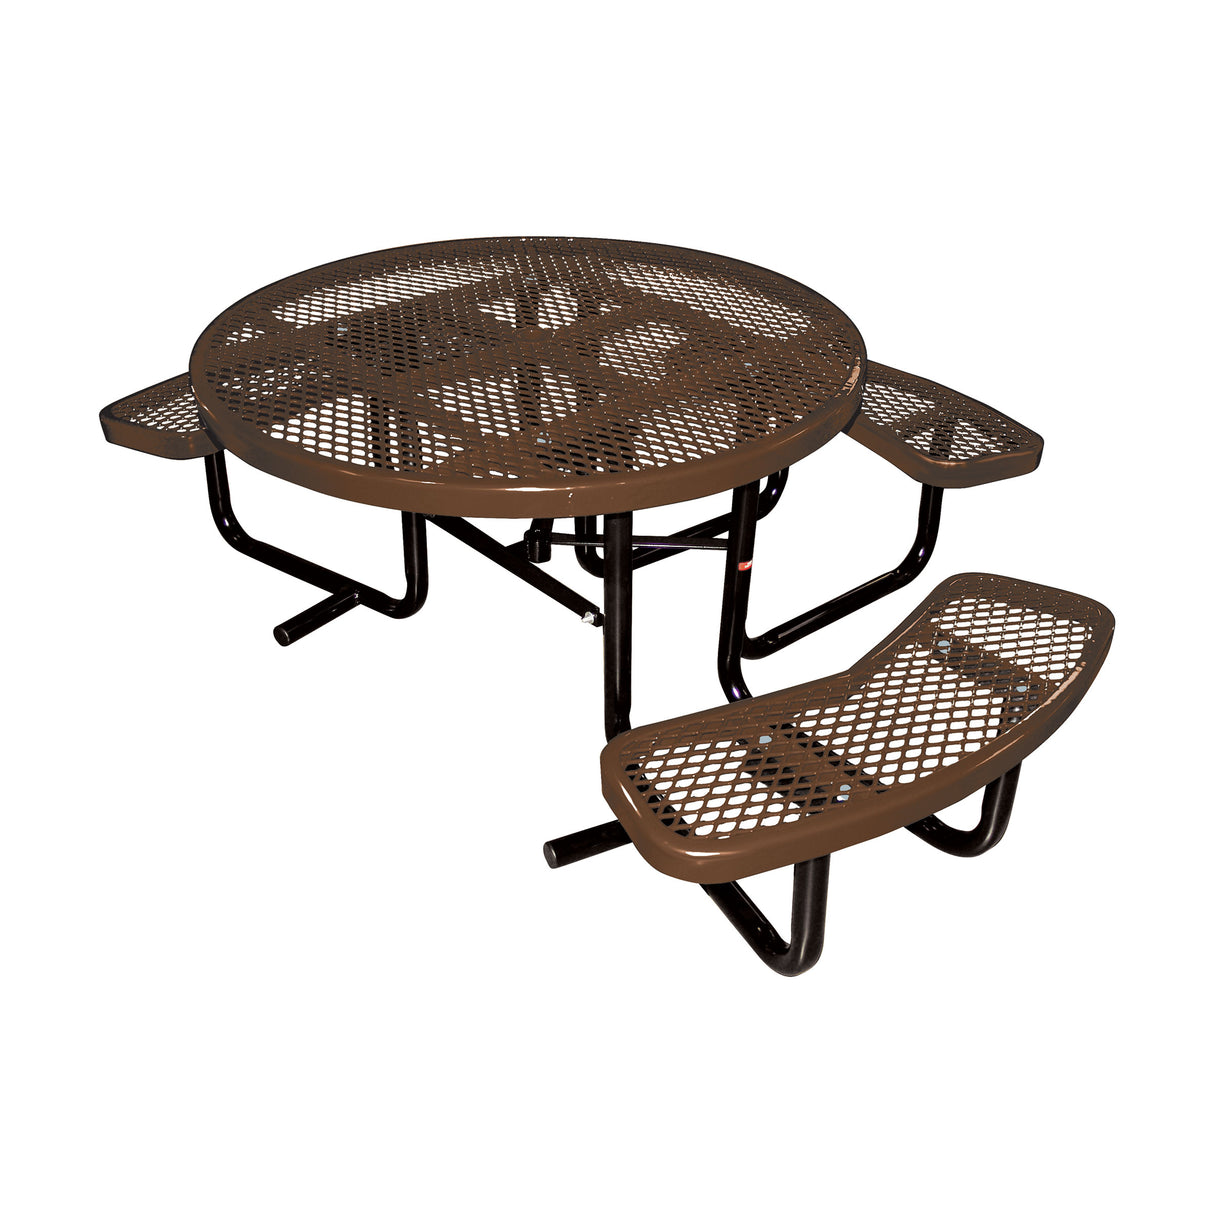 46" Round Expanded Metal Children's  Table